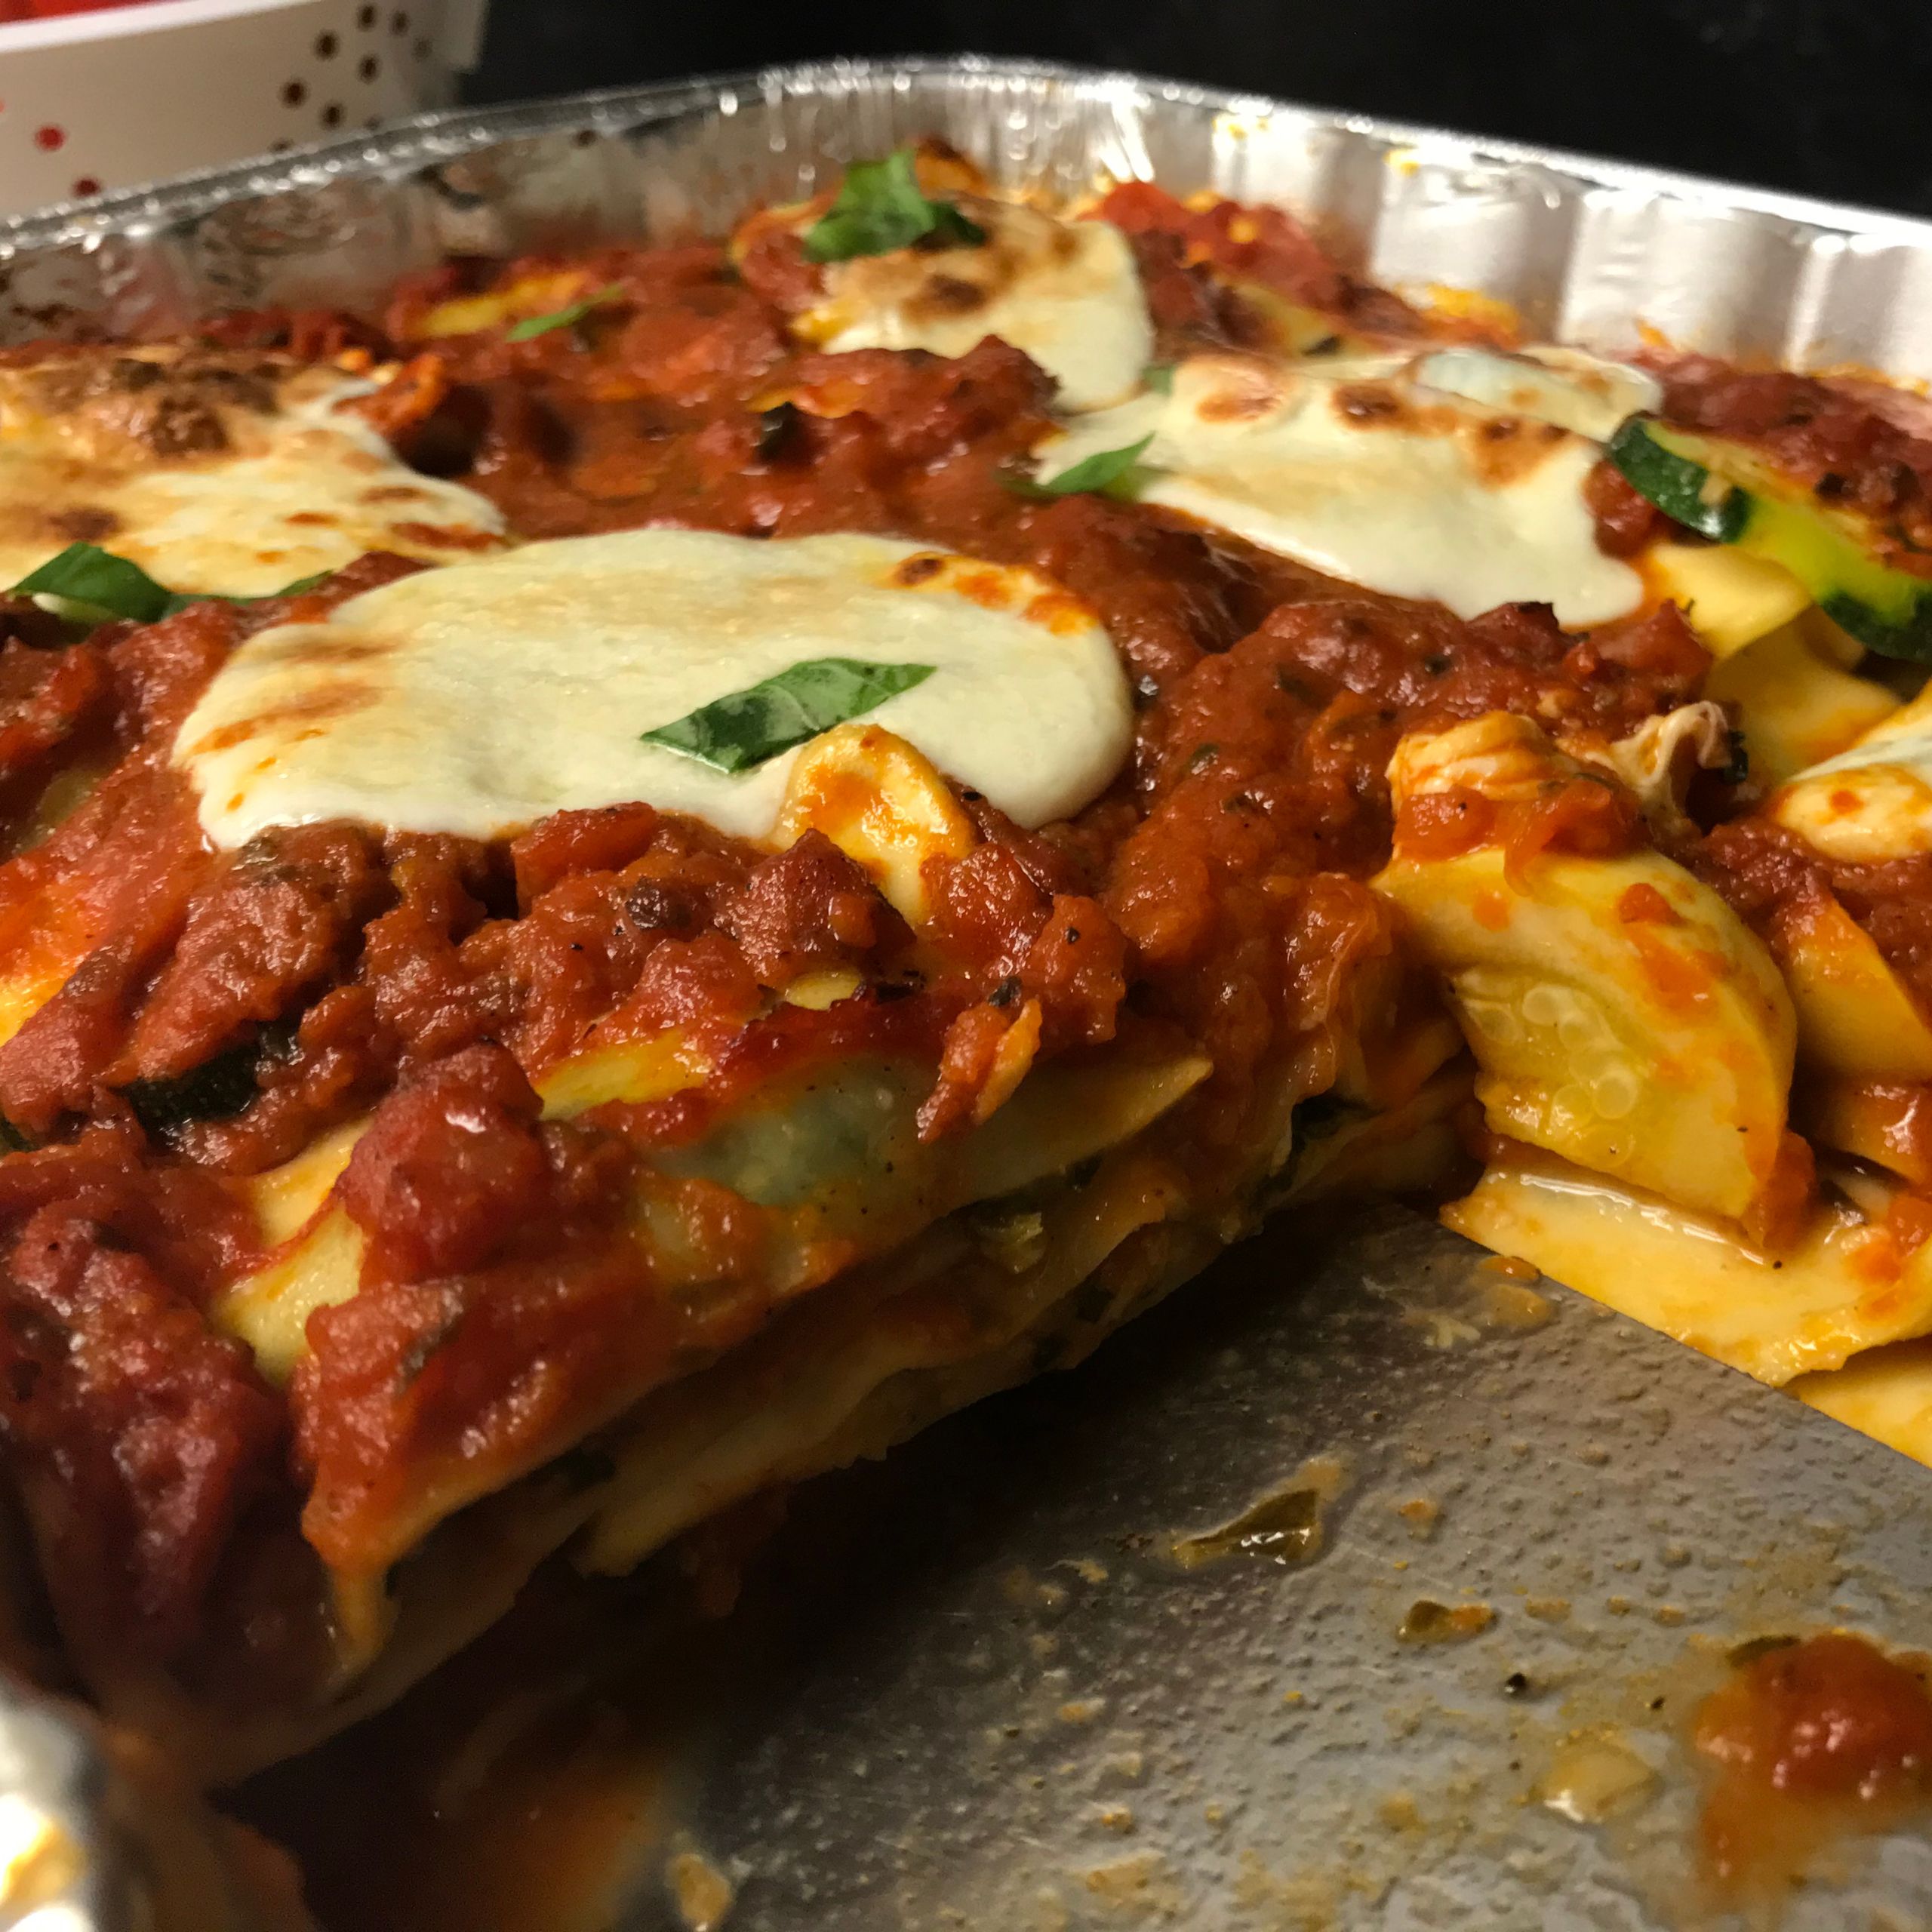 A portion cut from the tray of lasagna